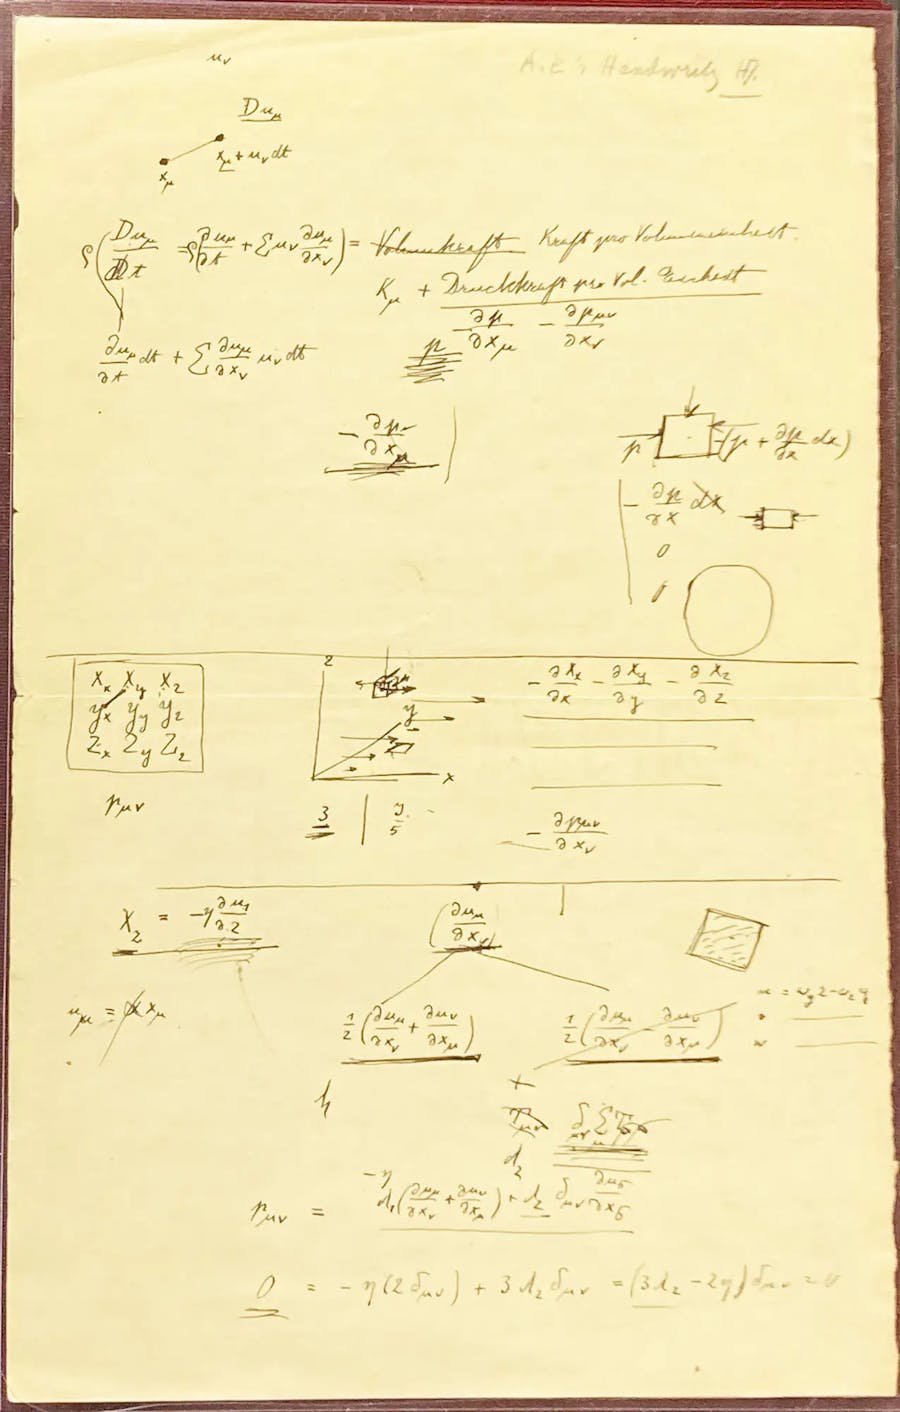 Albert Einstein, Autograph scientific notes on relativity theory. [Berlin, ca. 1914-1915]. 330 x 210 mm (8 1/4 x 13 in). One leaf, written on both sides in ink and pencil. Image © Manhattan Rare Books